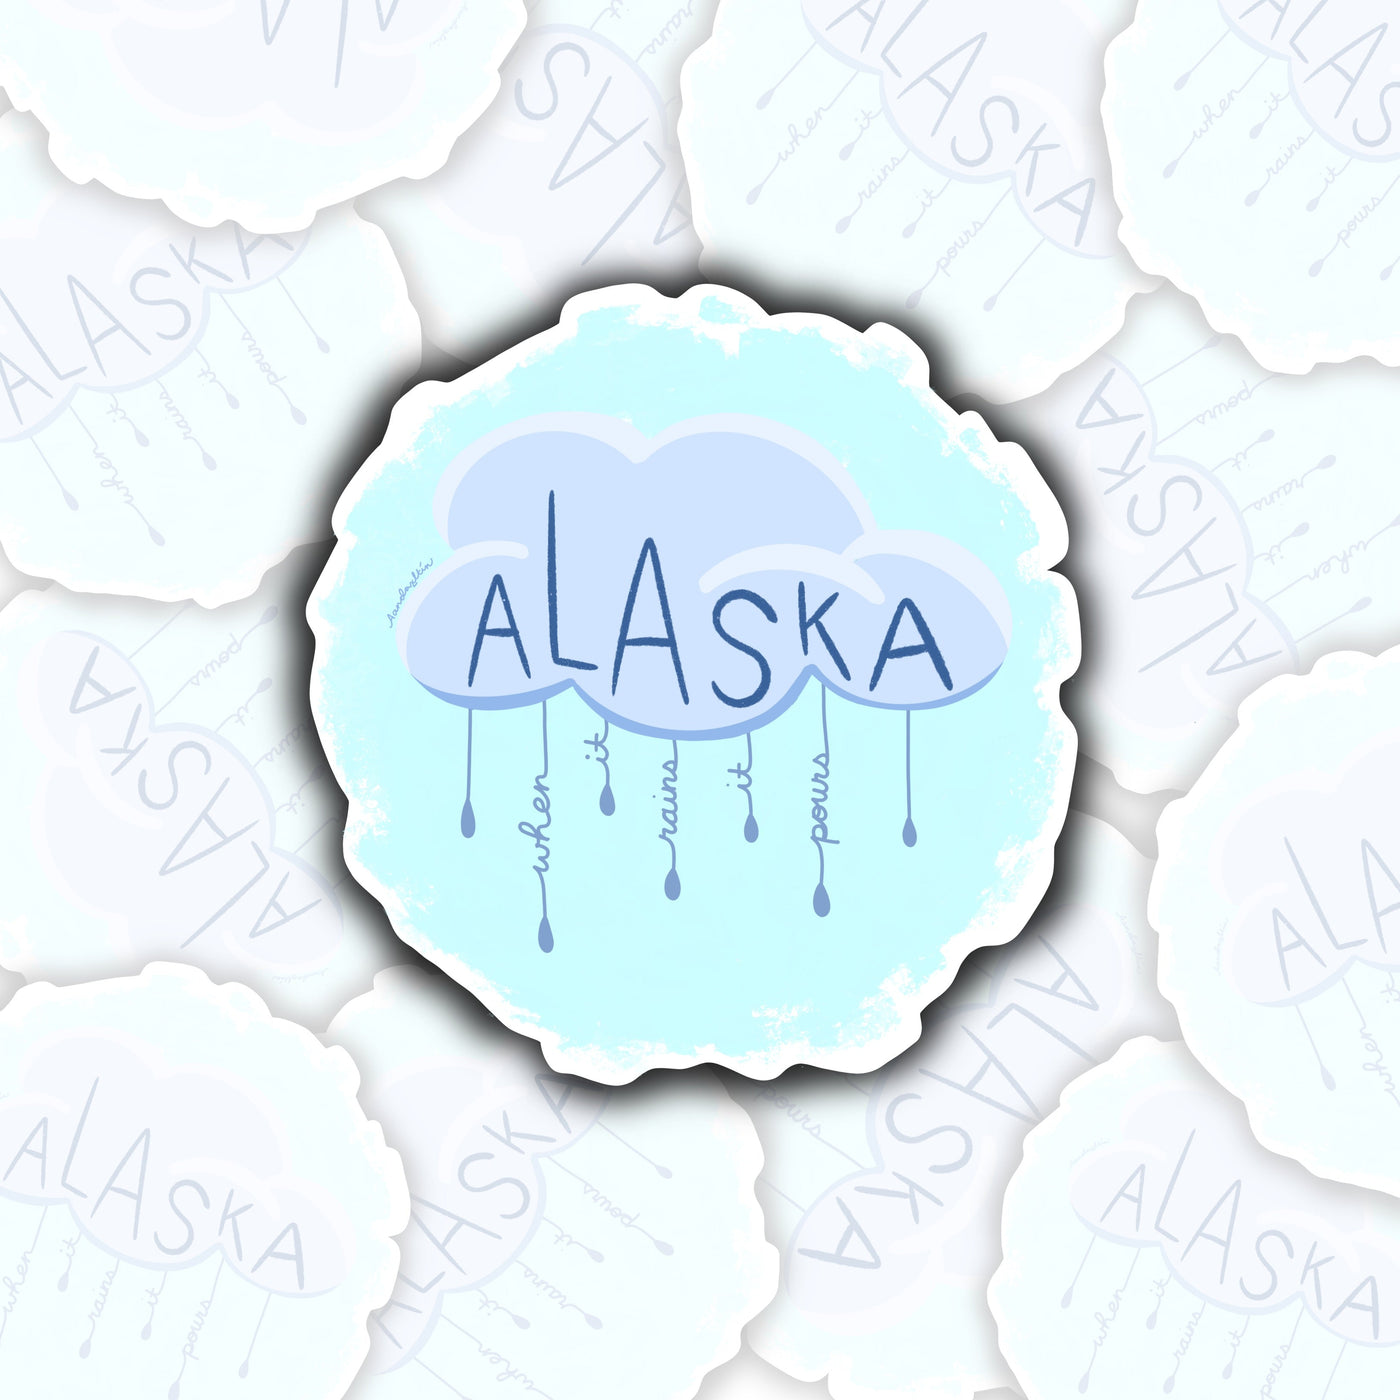 in the upper center of the sticker is a blue-grey cloud. in the cloud it says alaska. coming from the bottom of the cloud are lines of rain. in the lines, it says in cursive "when it rains it pours"